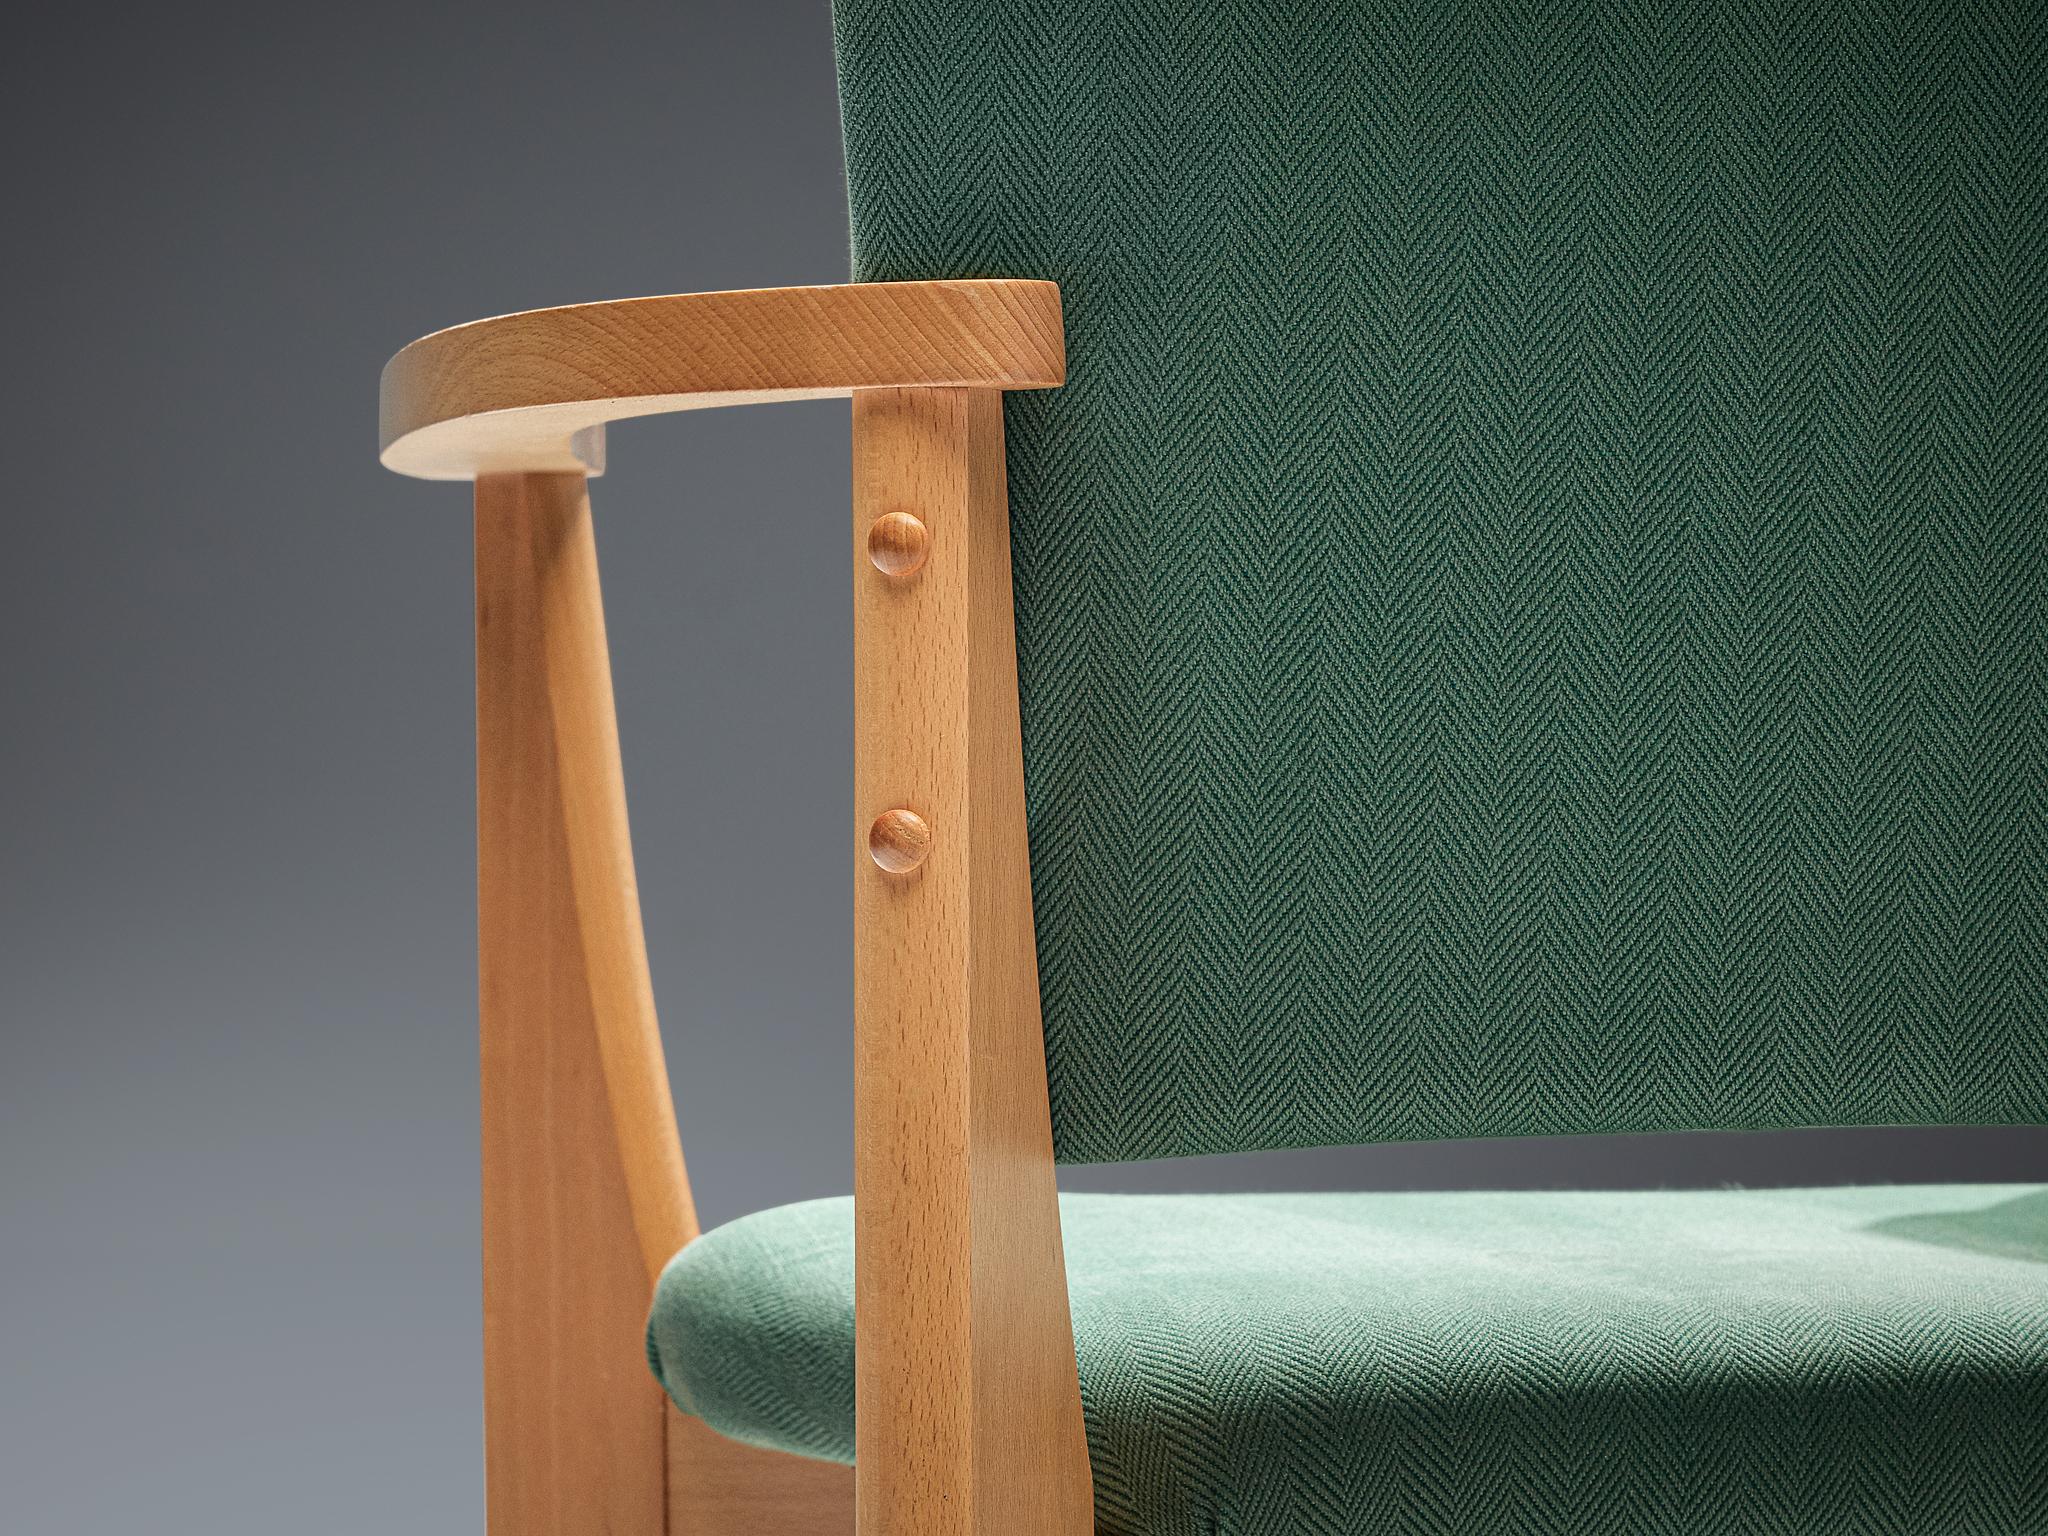 Dining Chairs in Beech and Green Upholstery 1